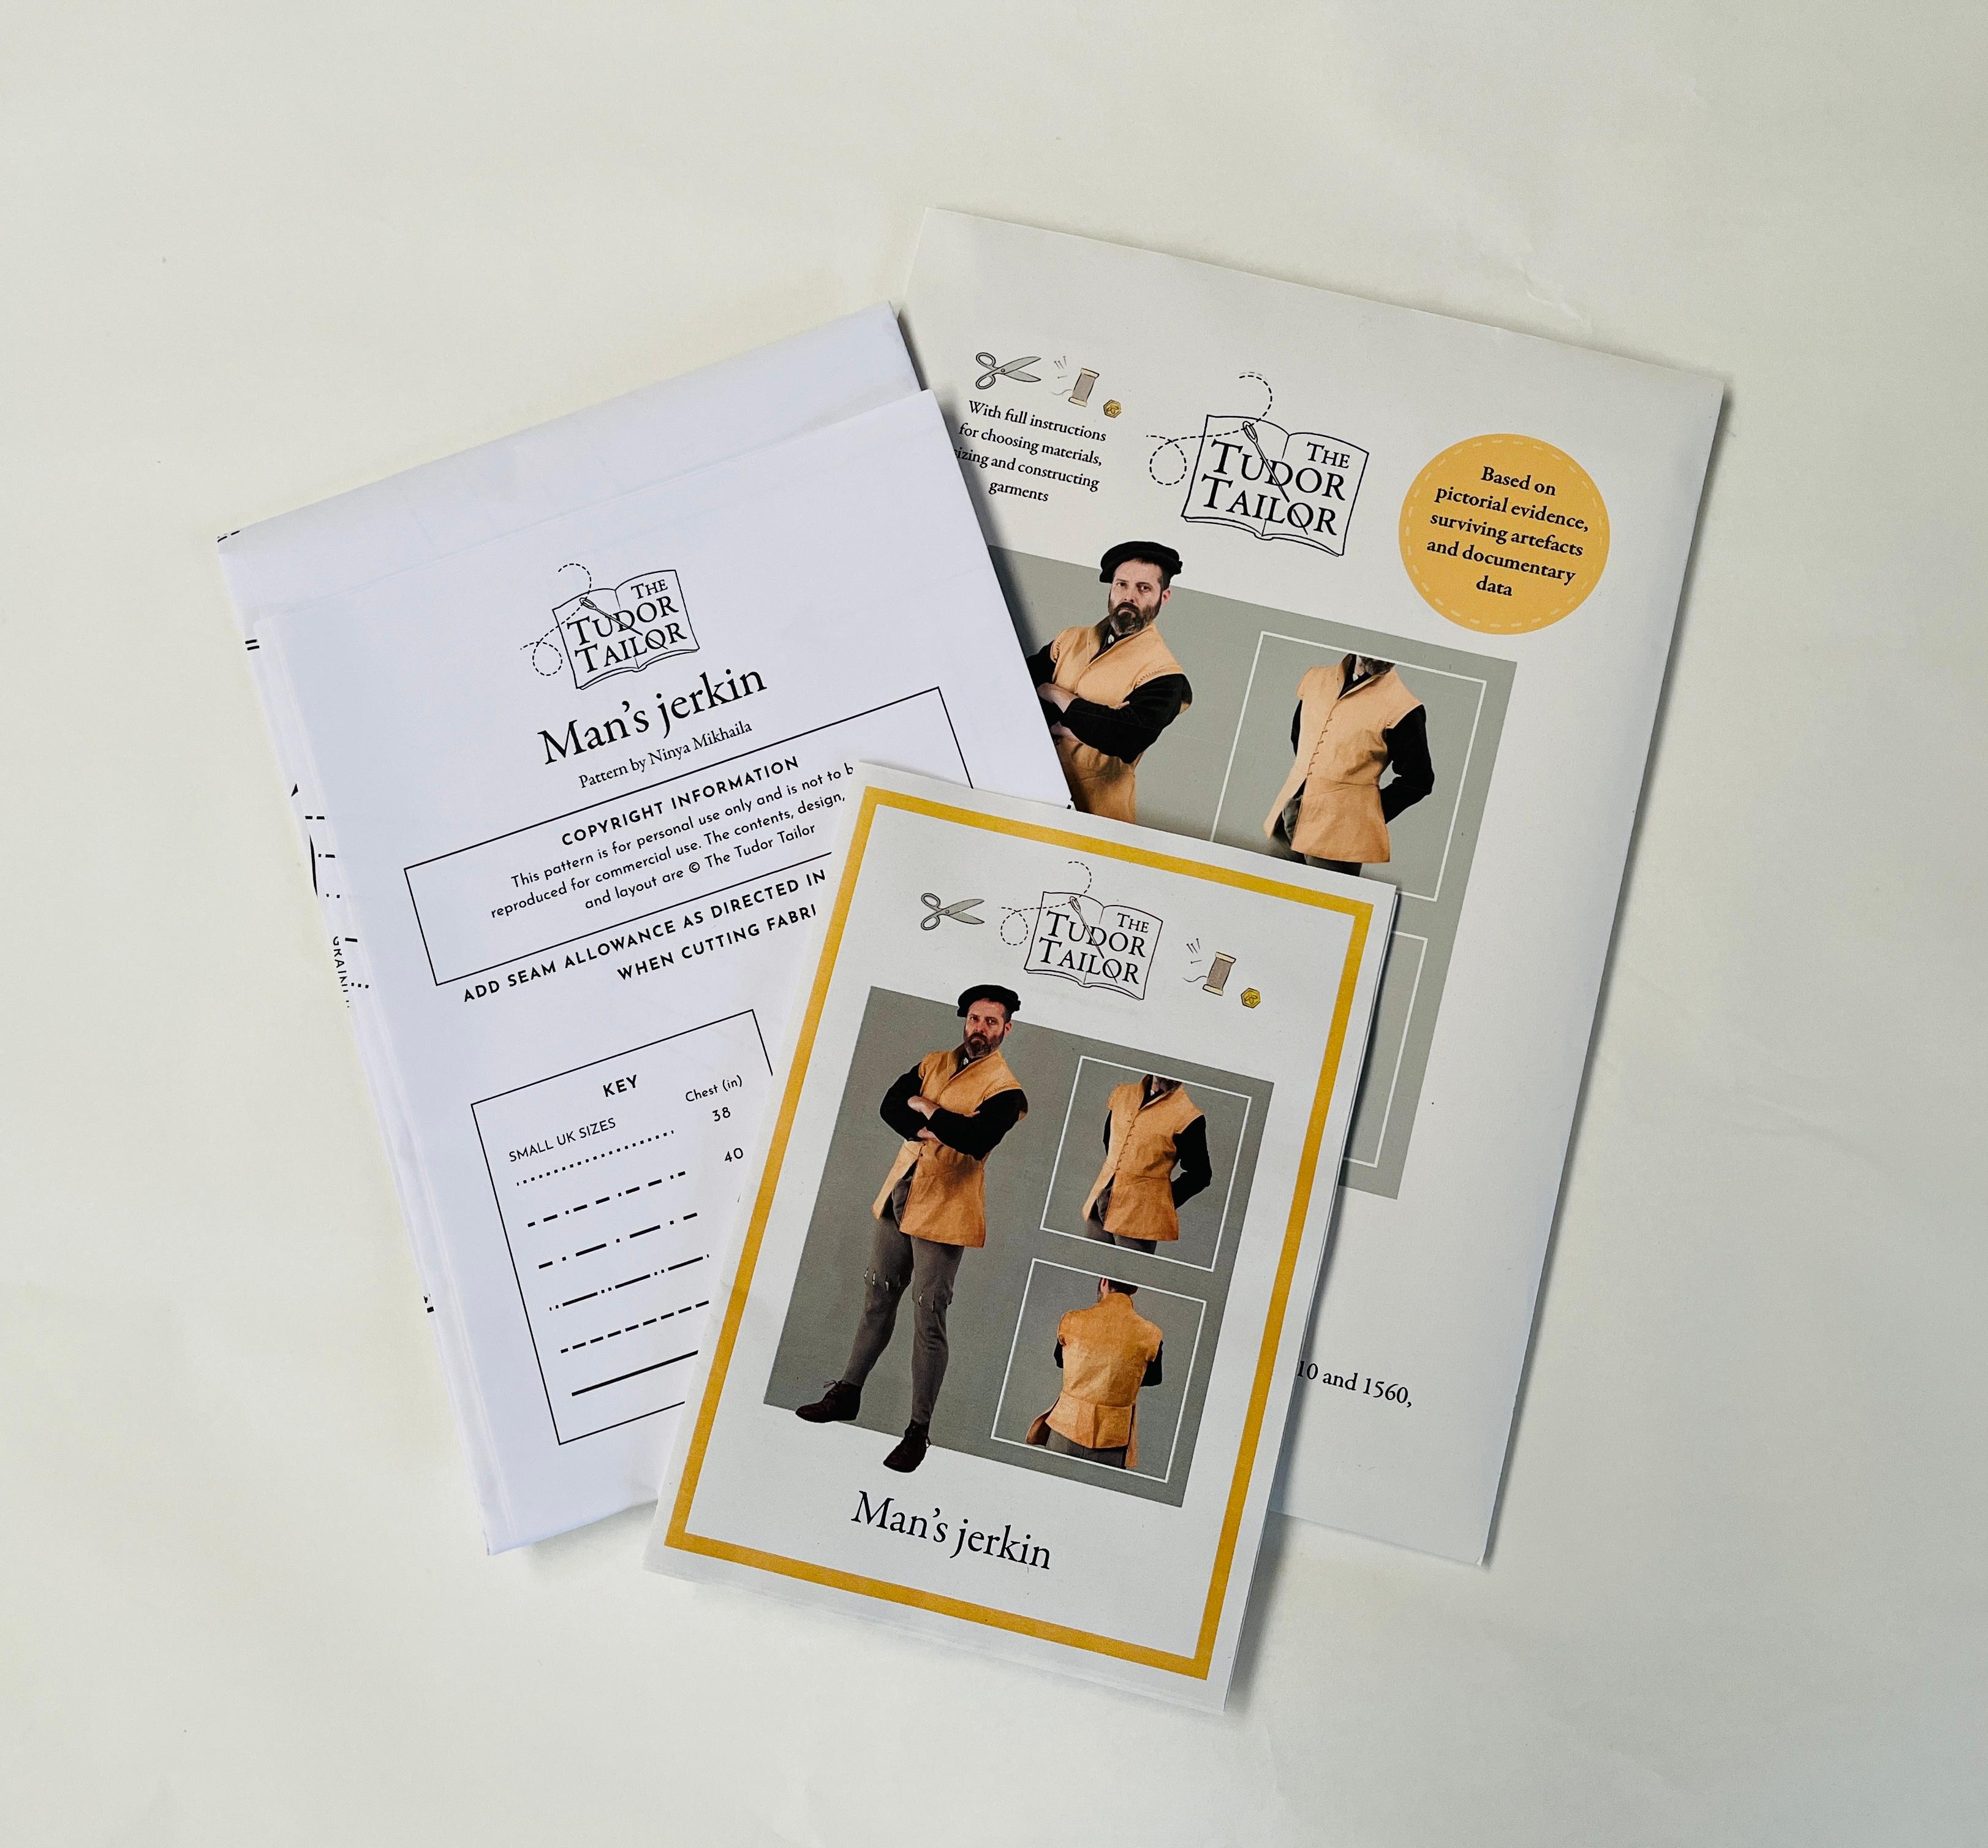 The new patterns include a helpful booklet of instructions and informative packaging